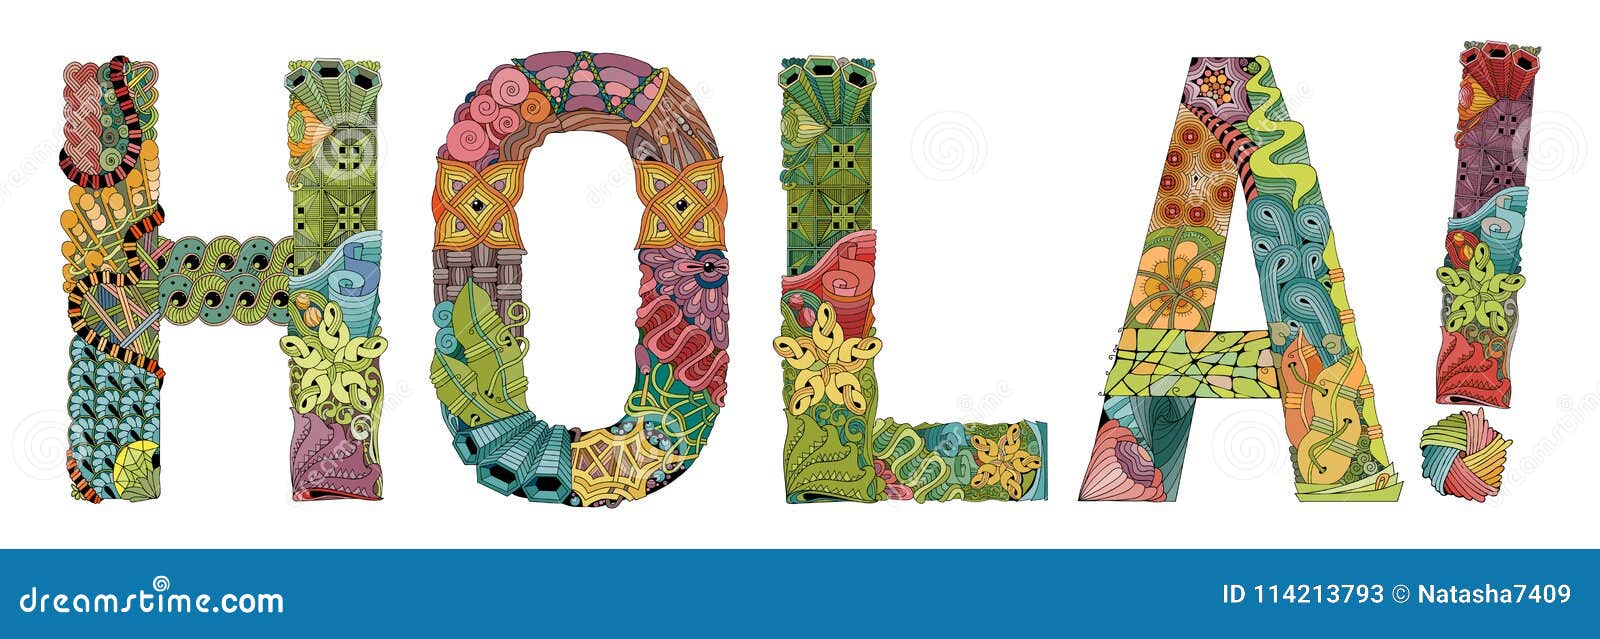 word hola in spanish.  decorative zentangle object